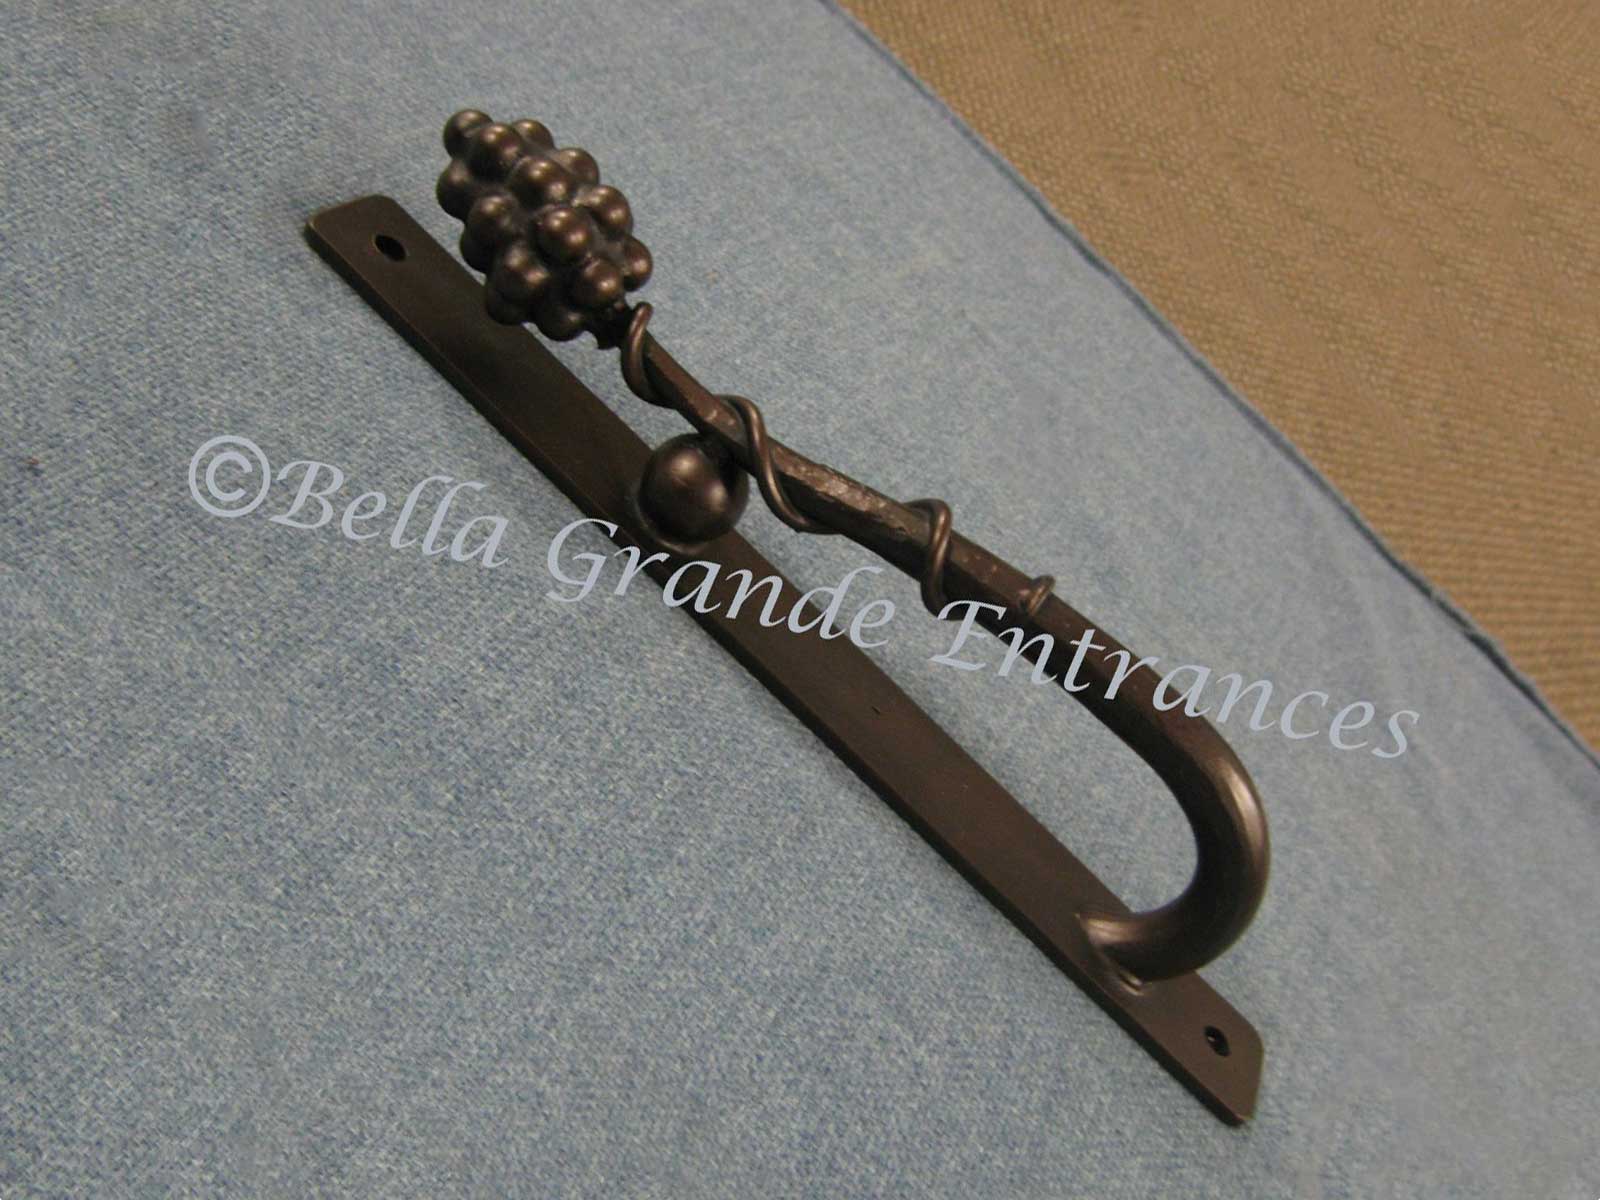 A Grape Vine Tube Pull handle 45 degree rotate image on a grey cloth surface